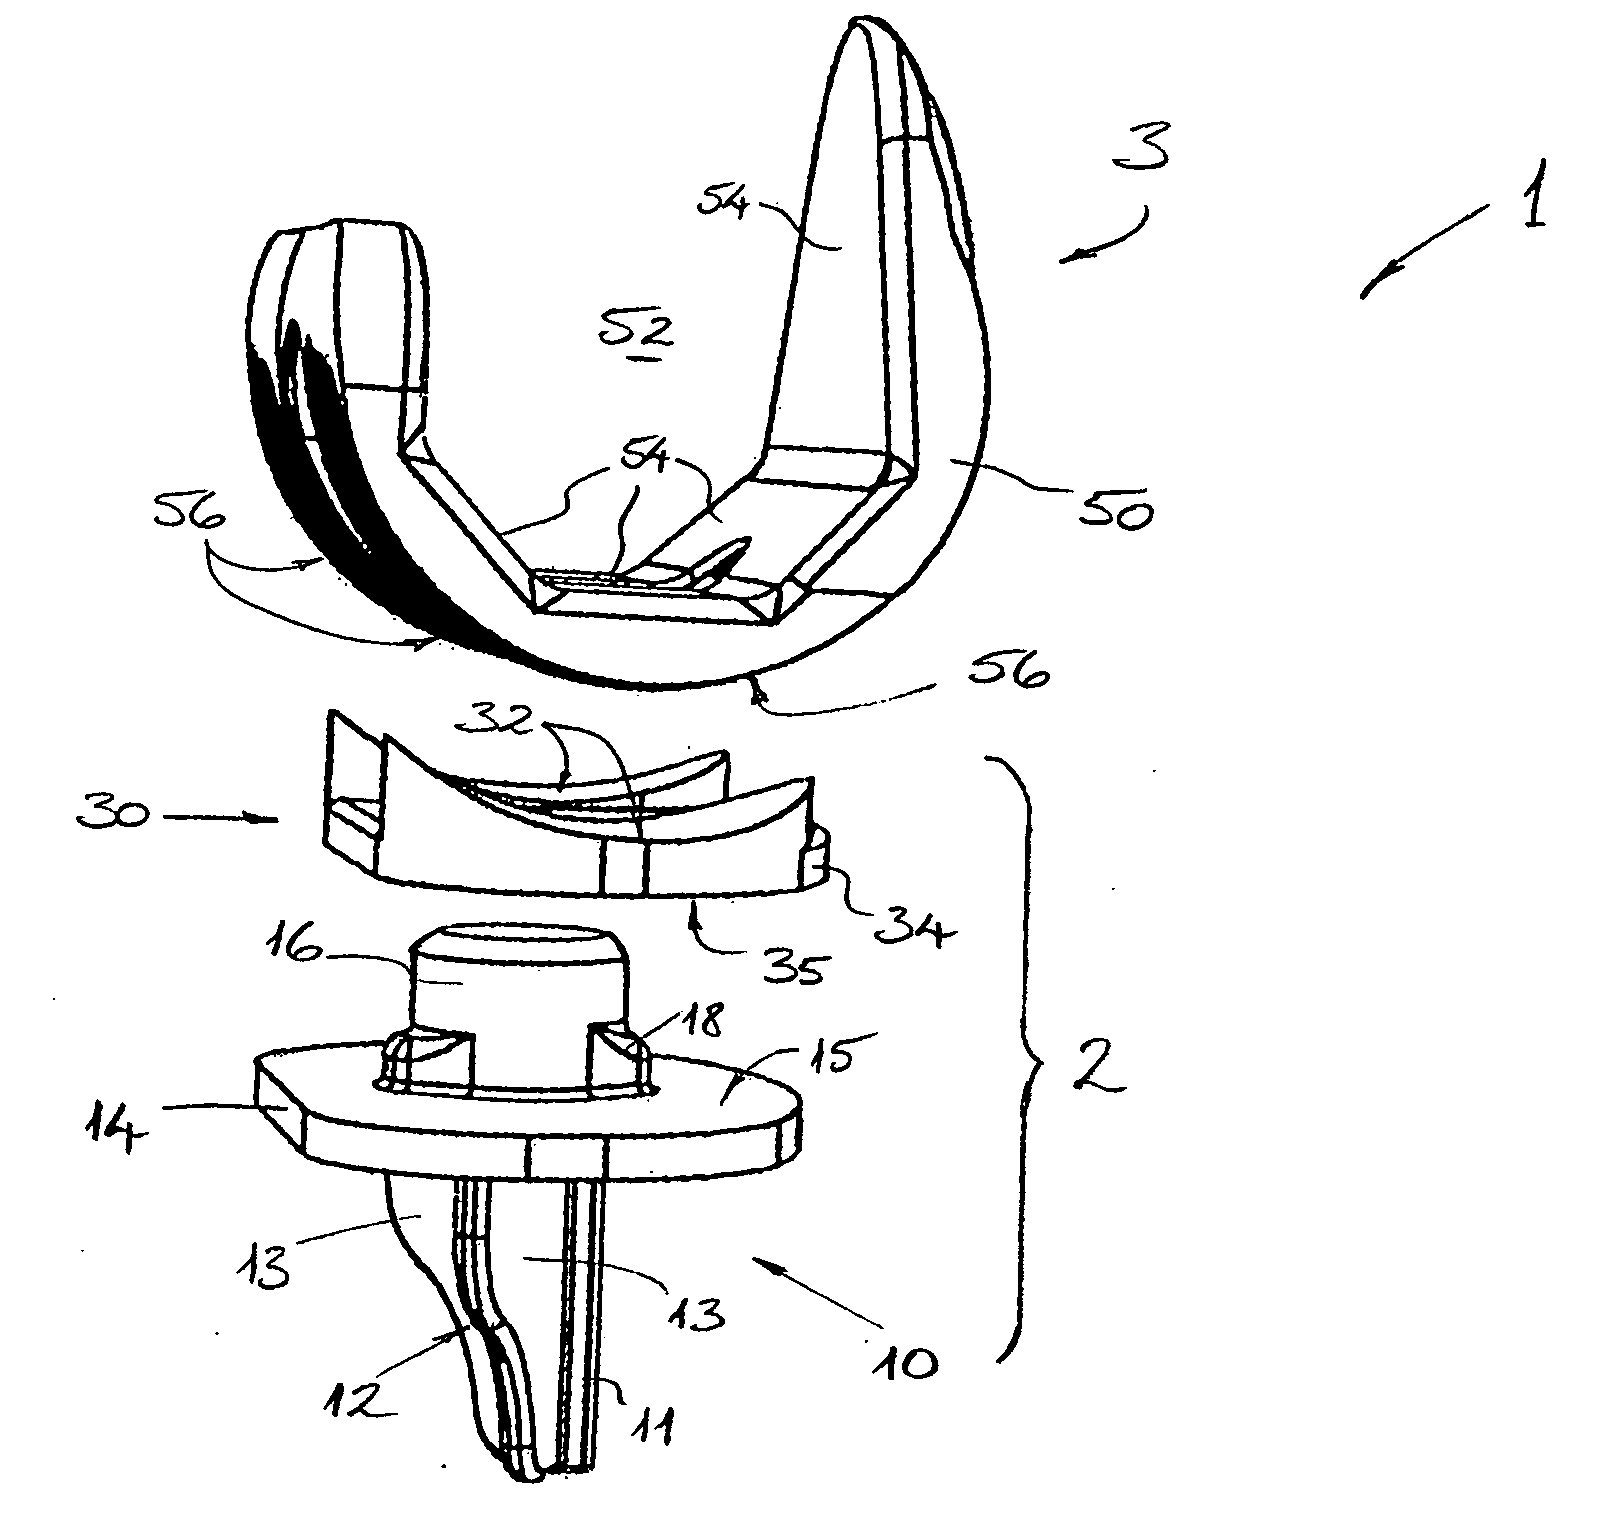 Knee joint prosthesis and related method